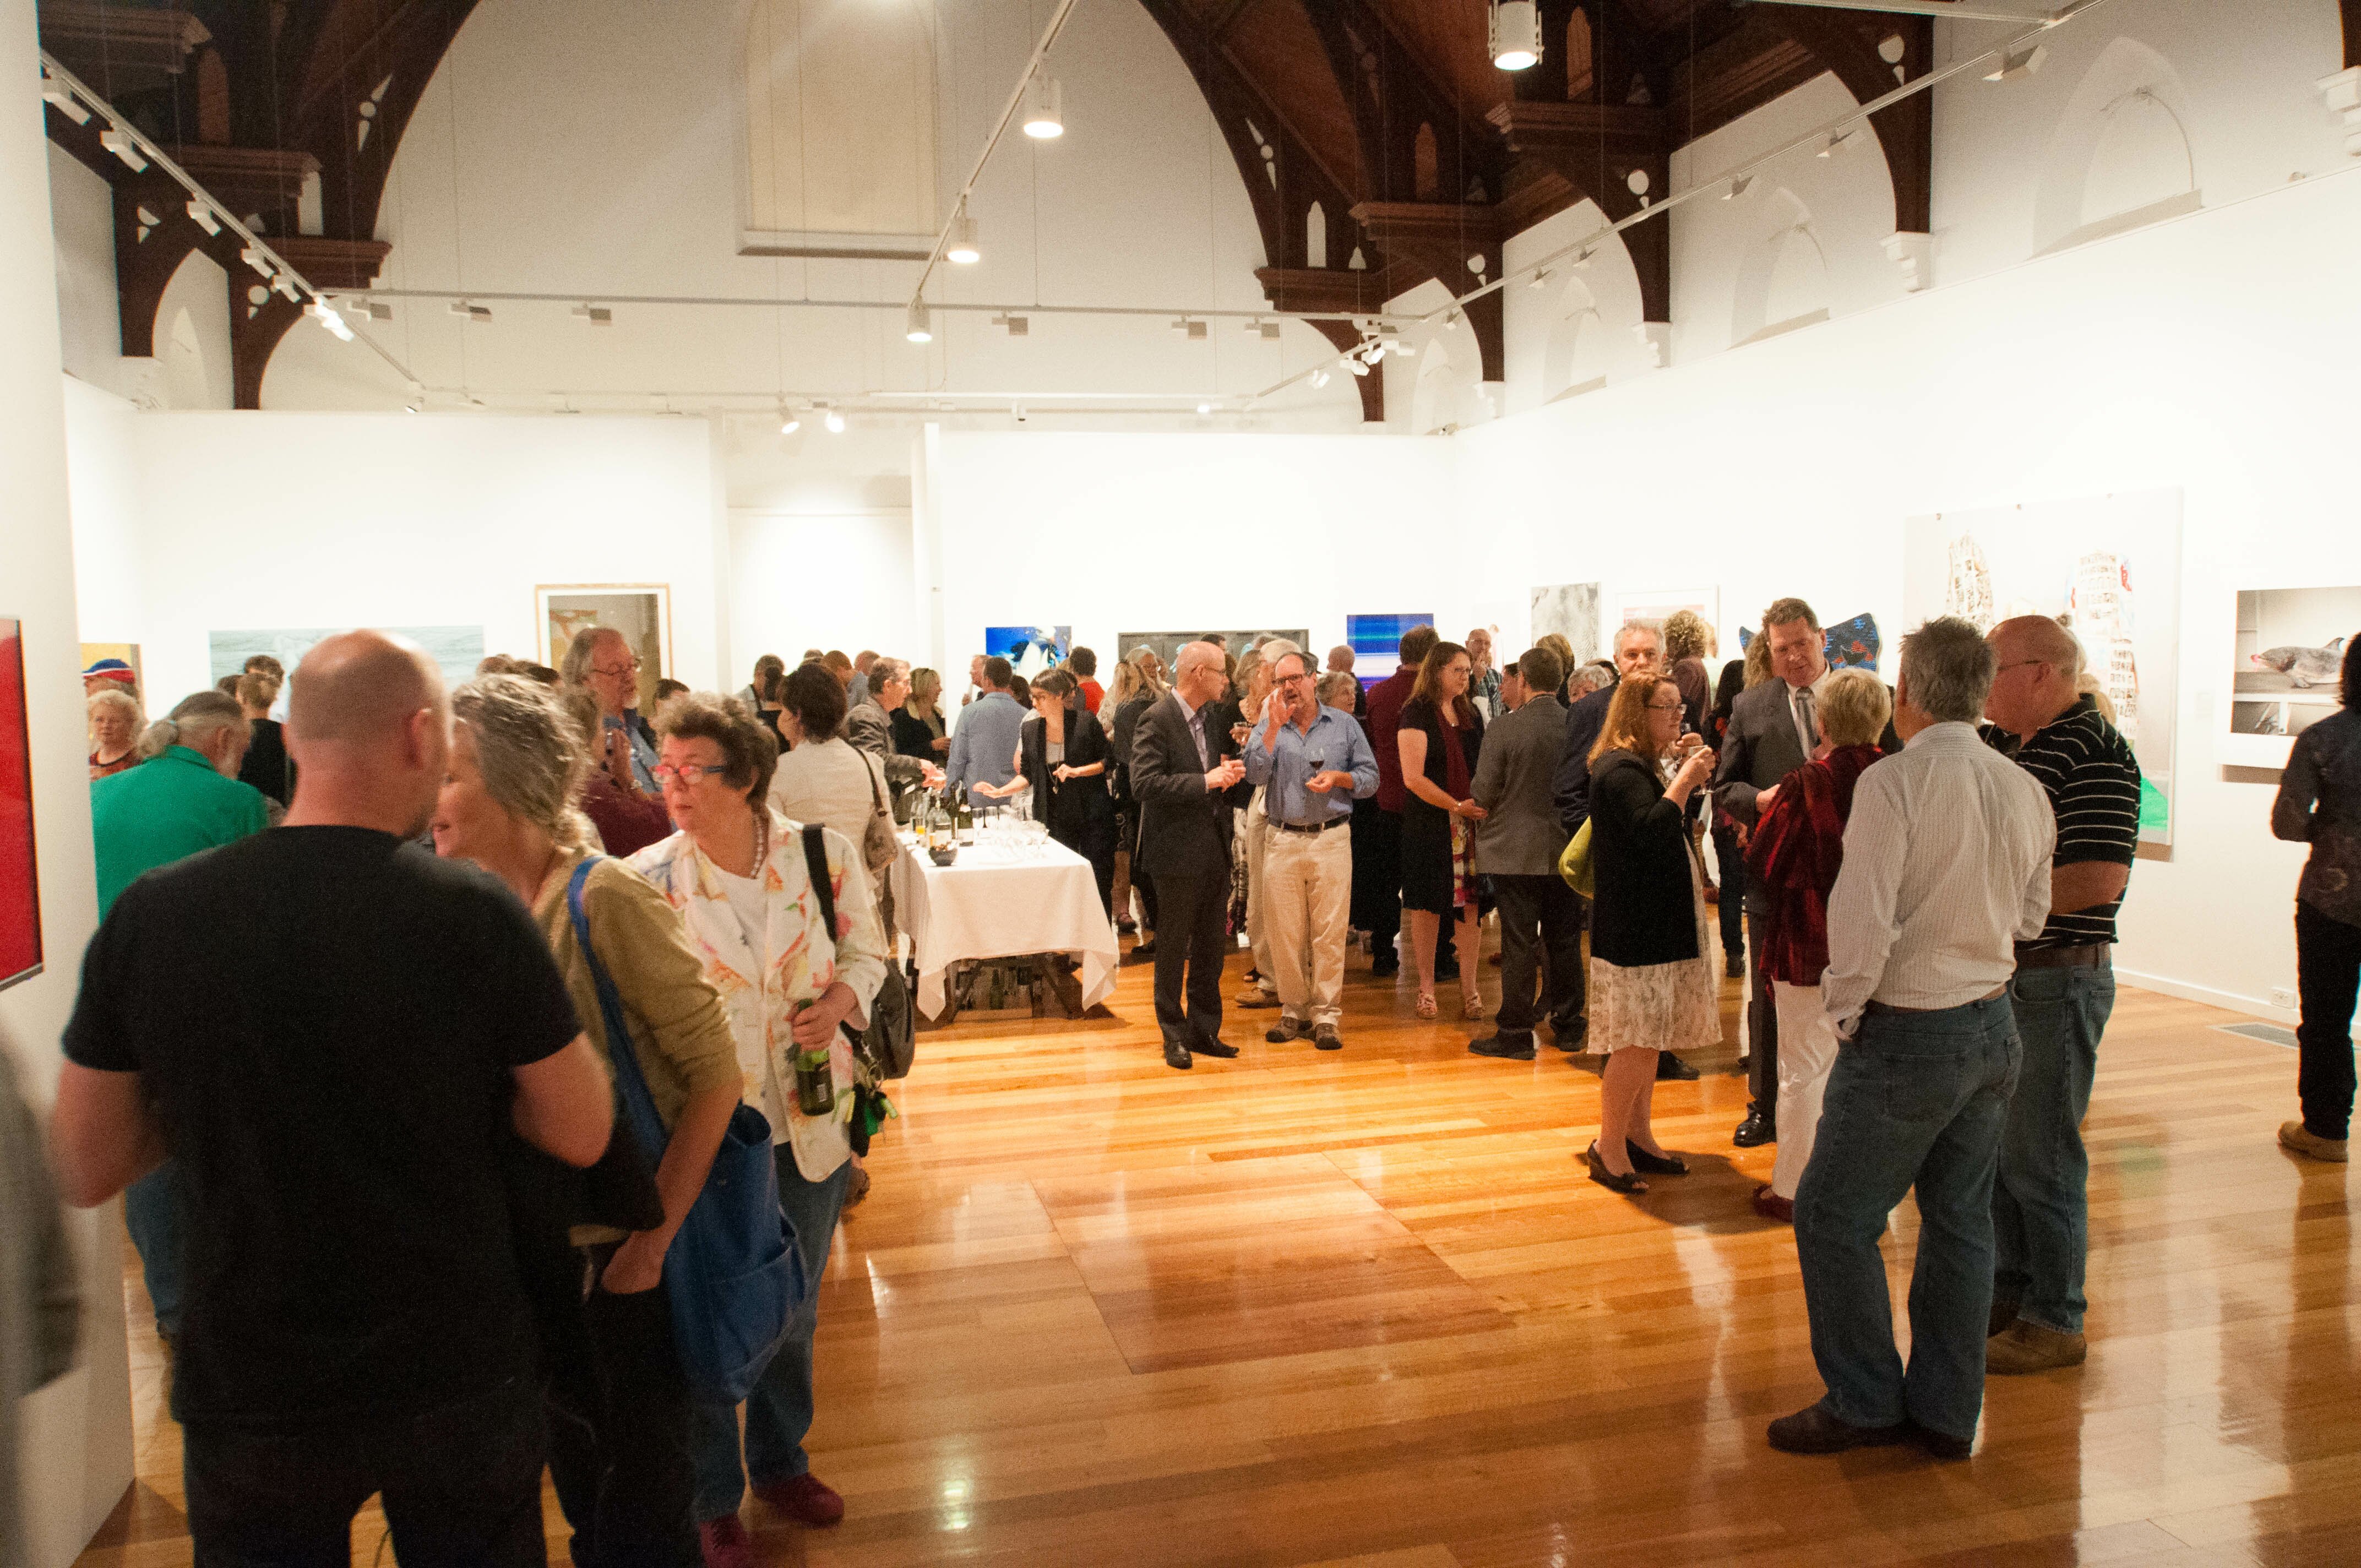 Tidal Exhibition Opening 12 December 2014